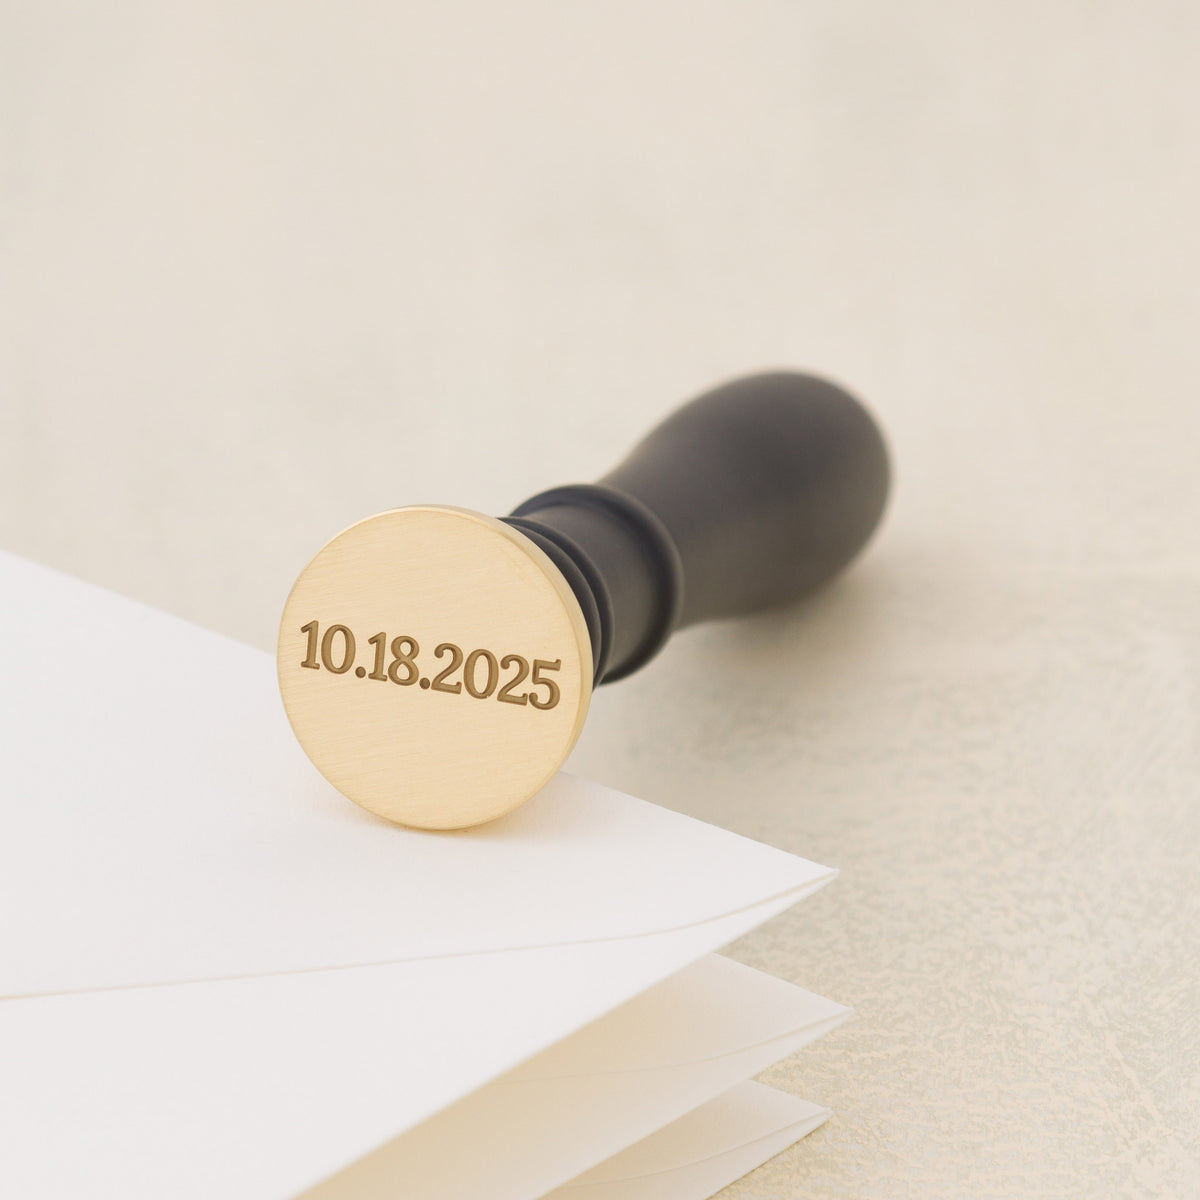 Intention Date Wax Stamp